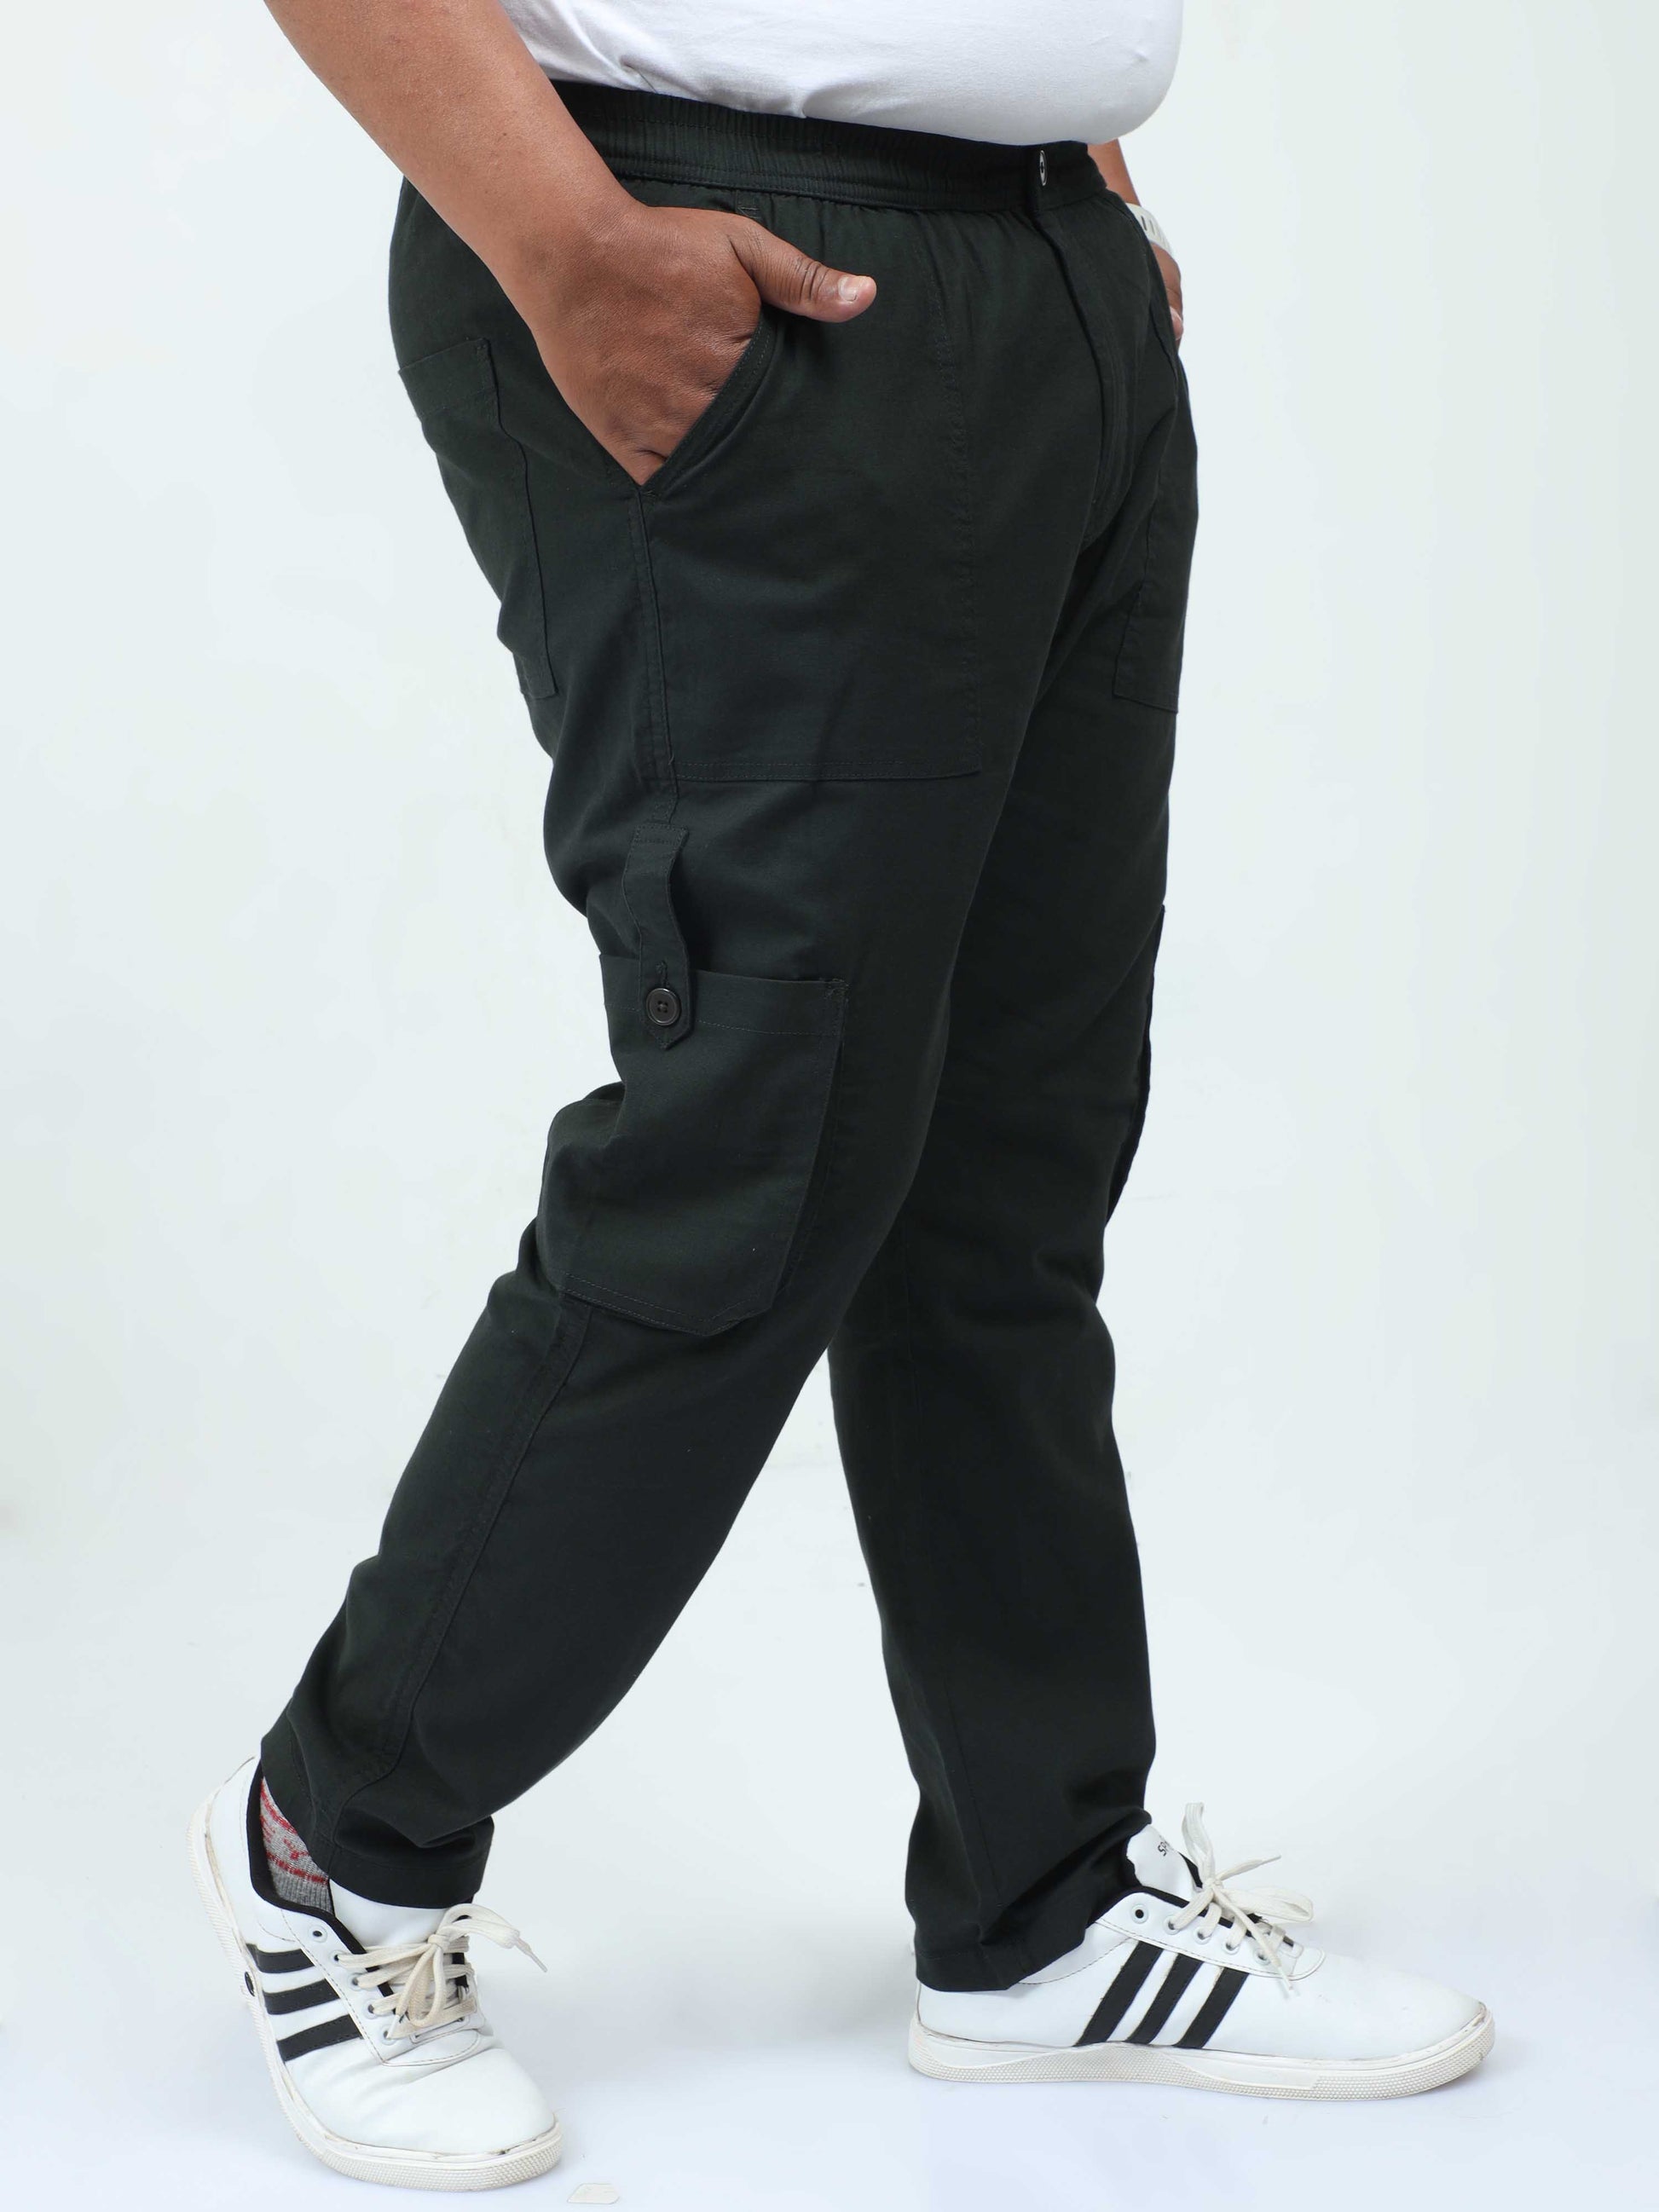 6 pockets cargo pants for men high quality